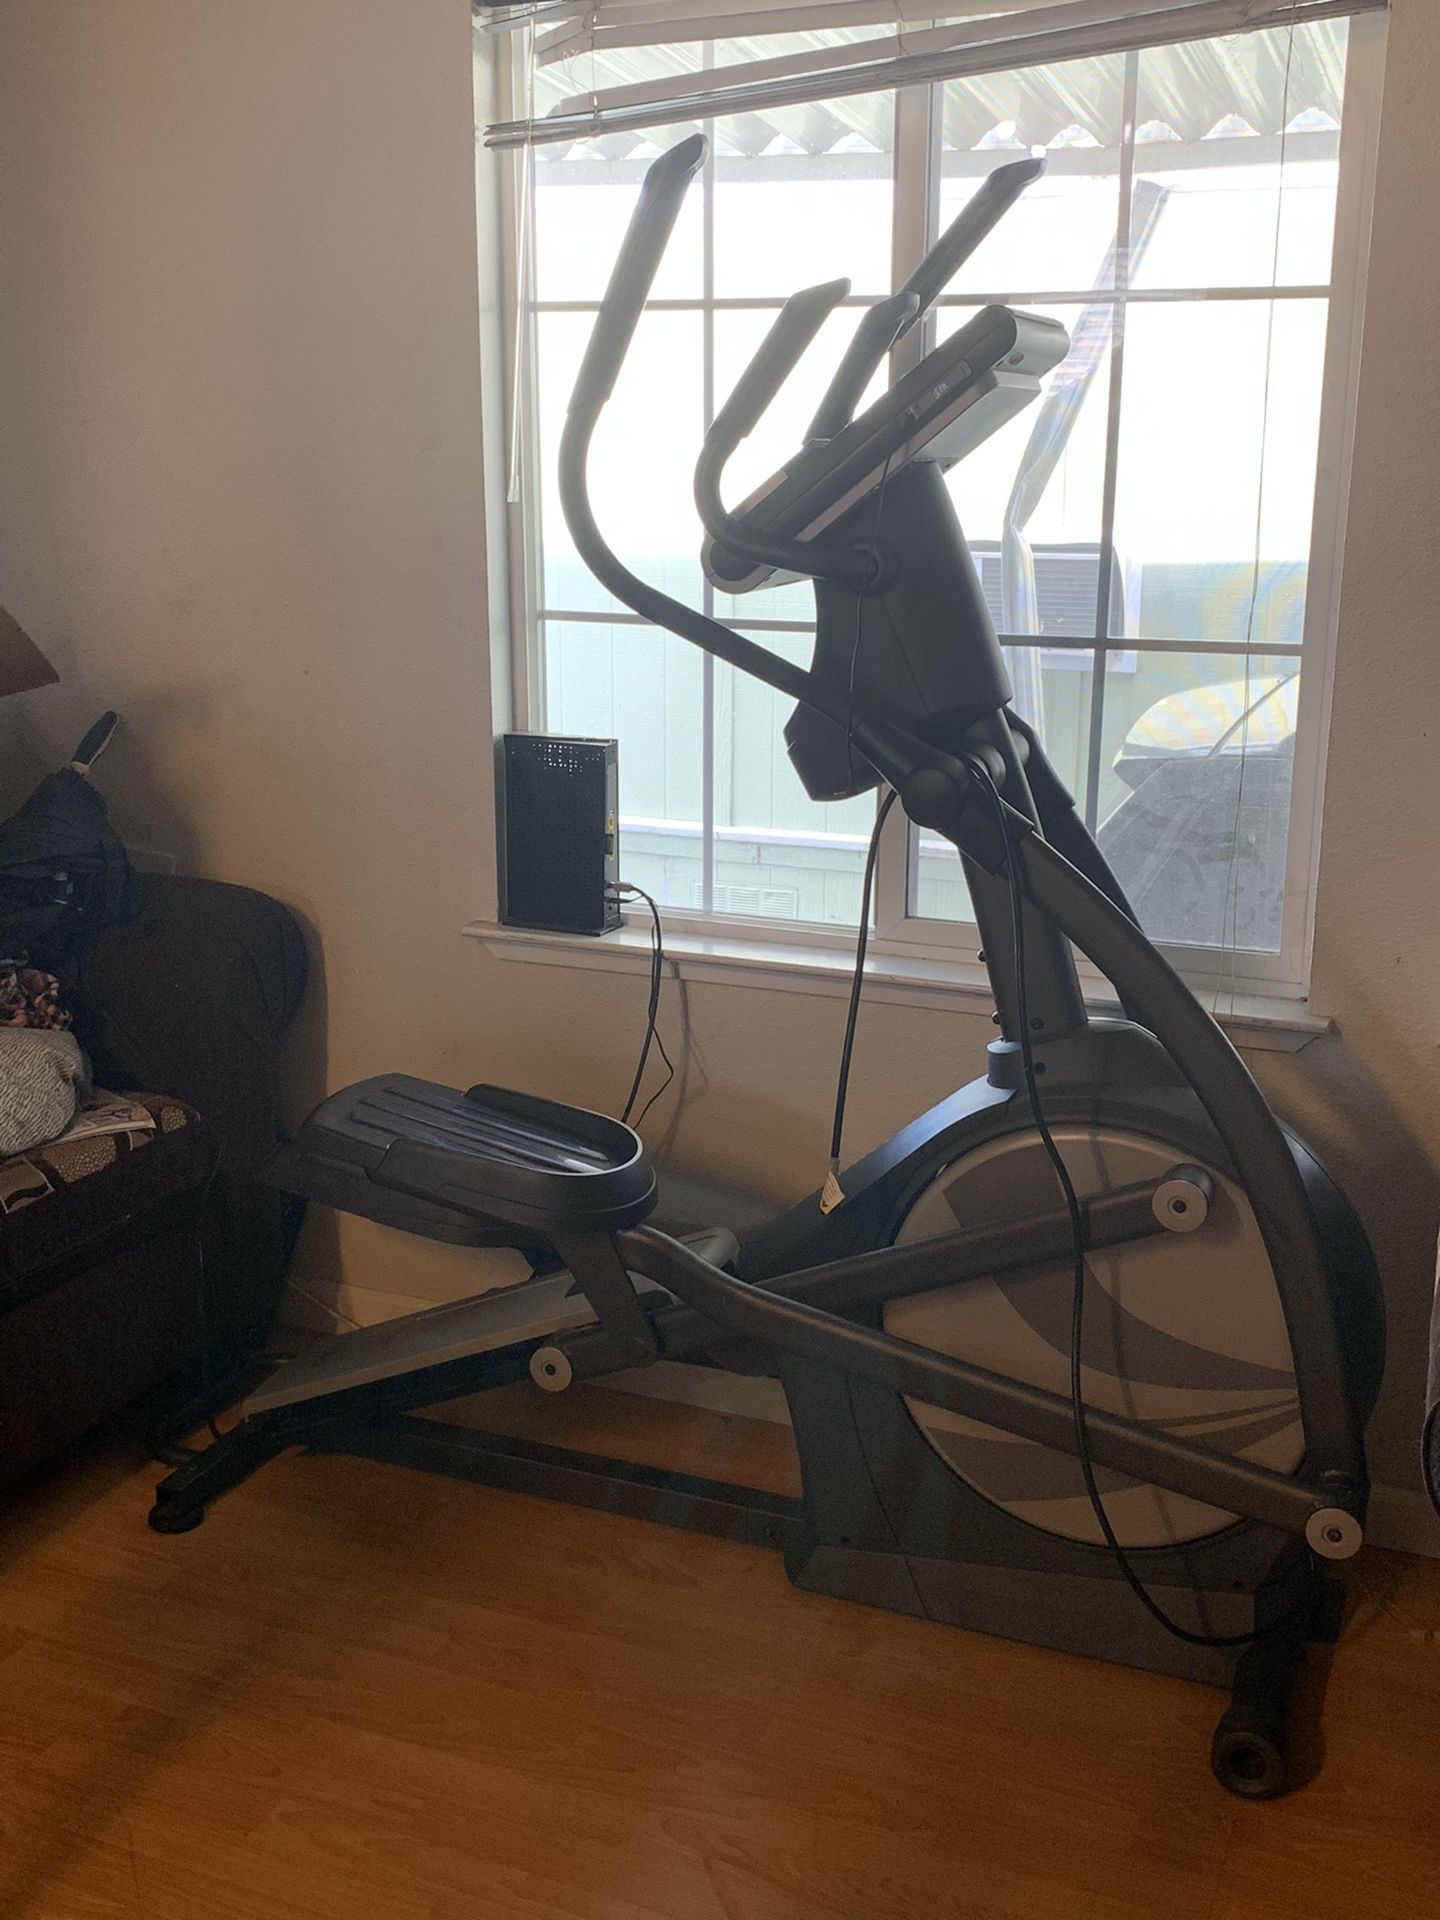 HealthRider Stride Trainer 900 Elliptical with iFit and heart rate monitor